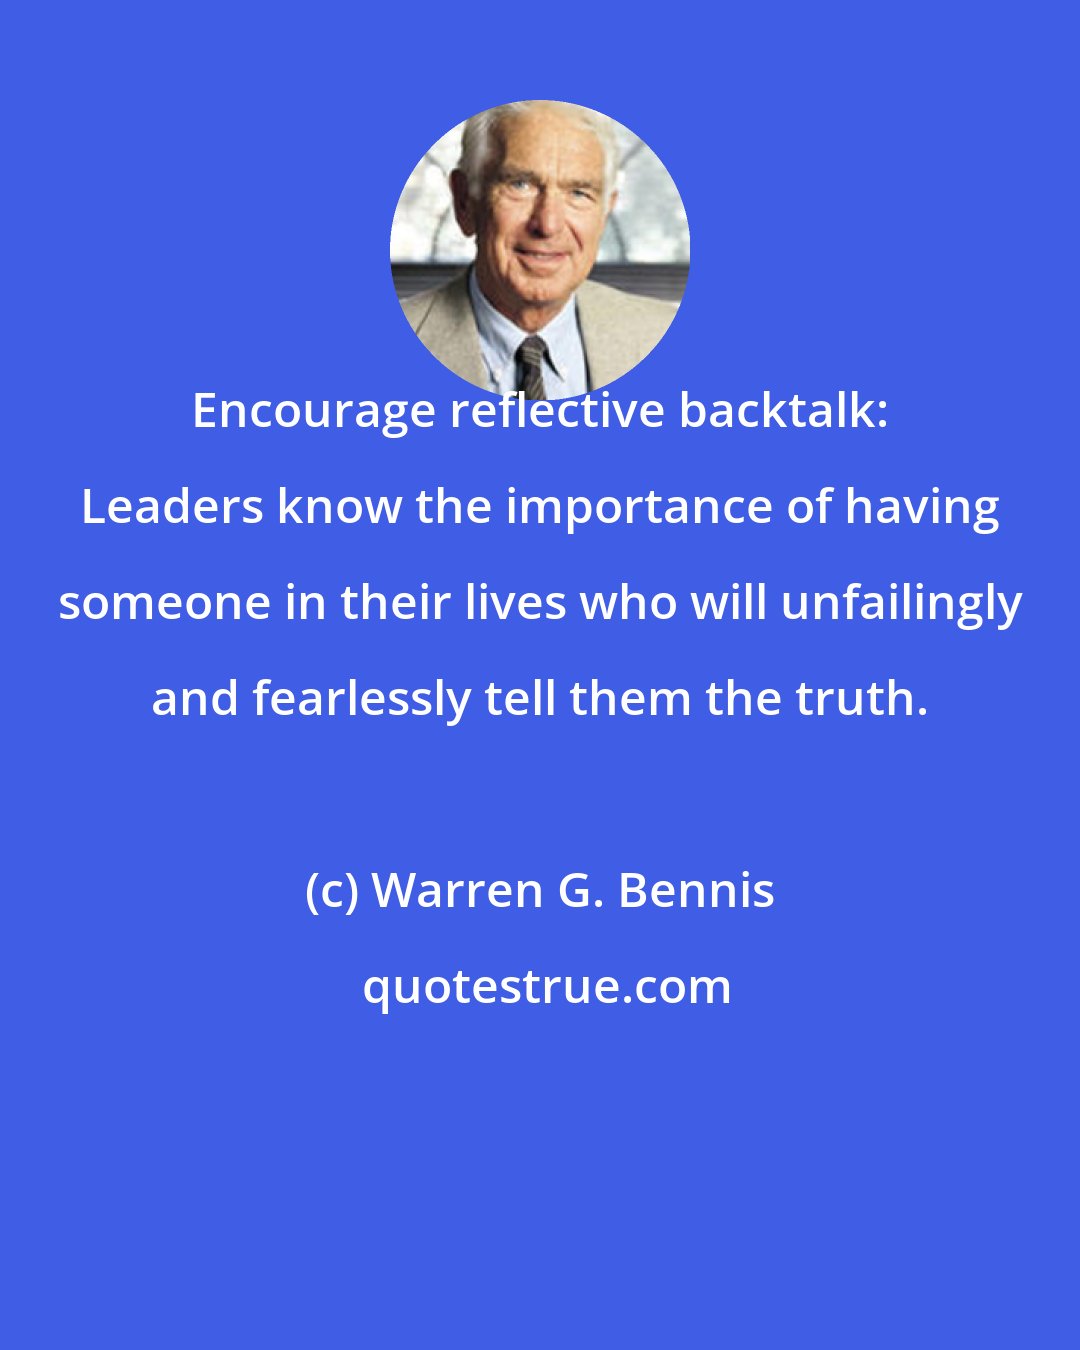 Warren G. Bennis: Encourage reflective backtalk: Leaders know the importance of having someone in their lives who will unfailingly and fearlessly tell them the truth.